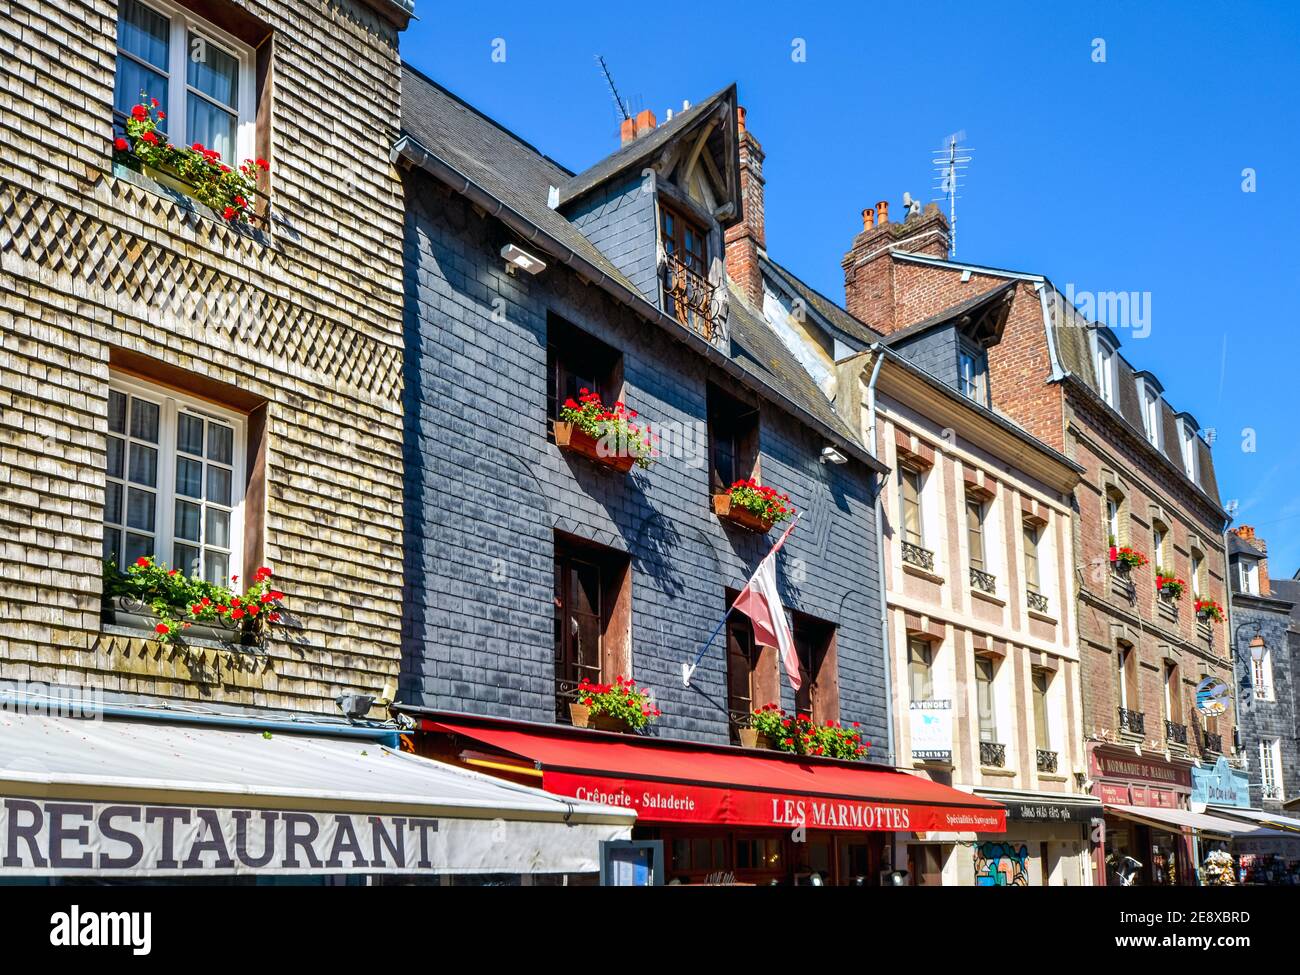 General view of the facade and awning of the Les Marmottes Creperie and restaurant in the Normandy town of Honfleur, France Stock Photo